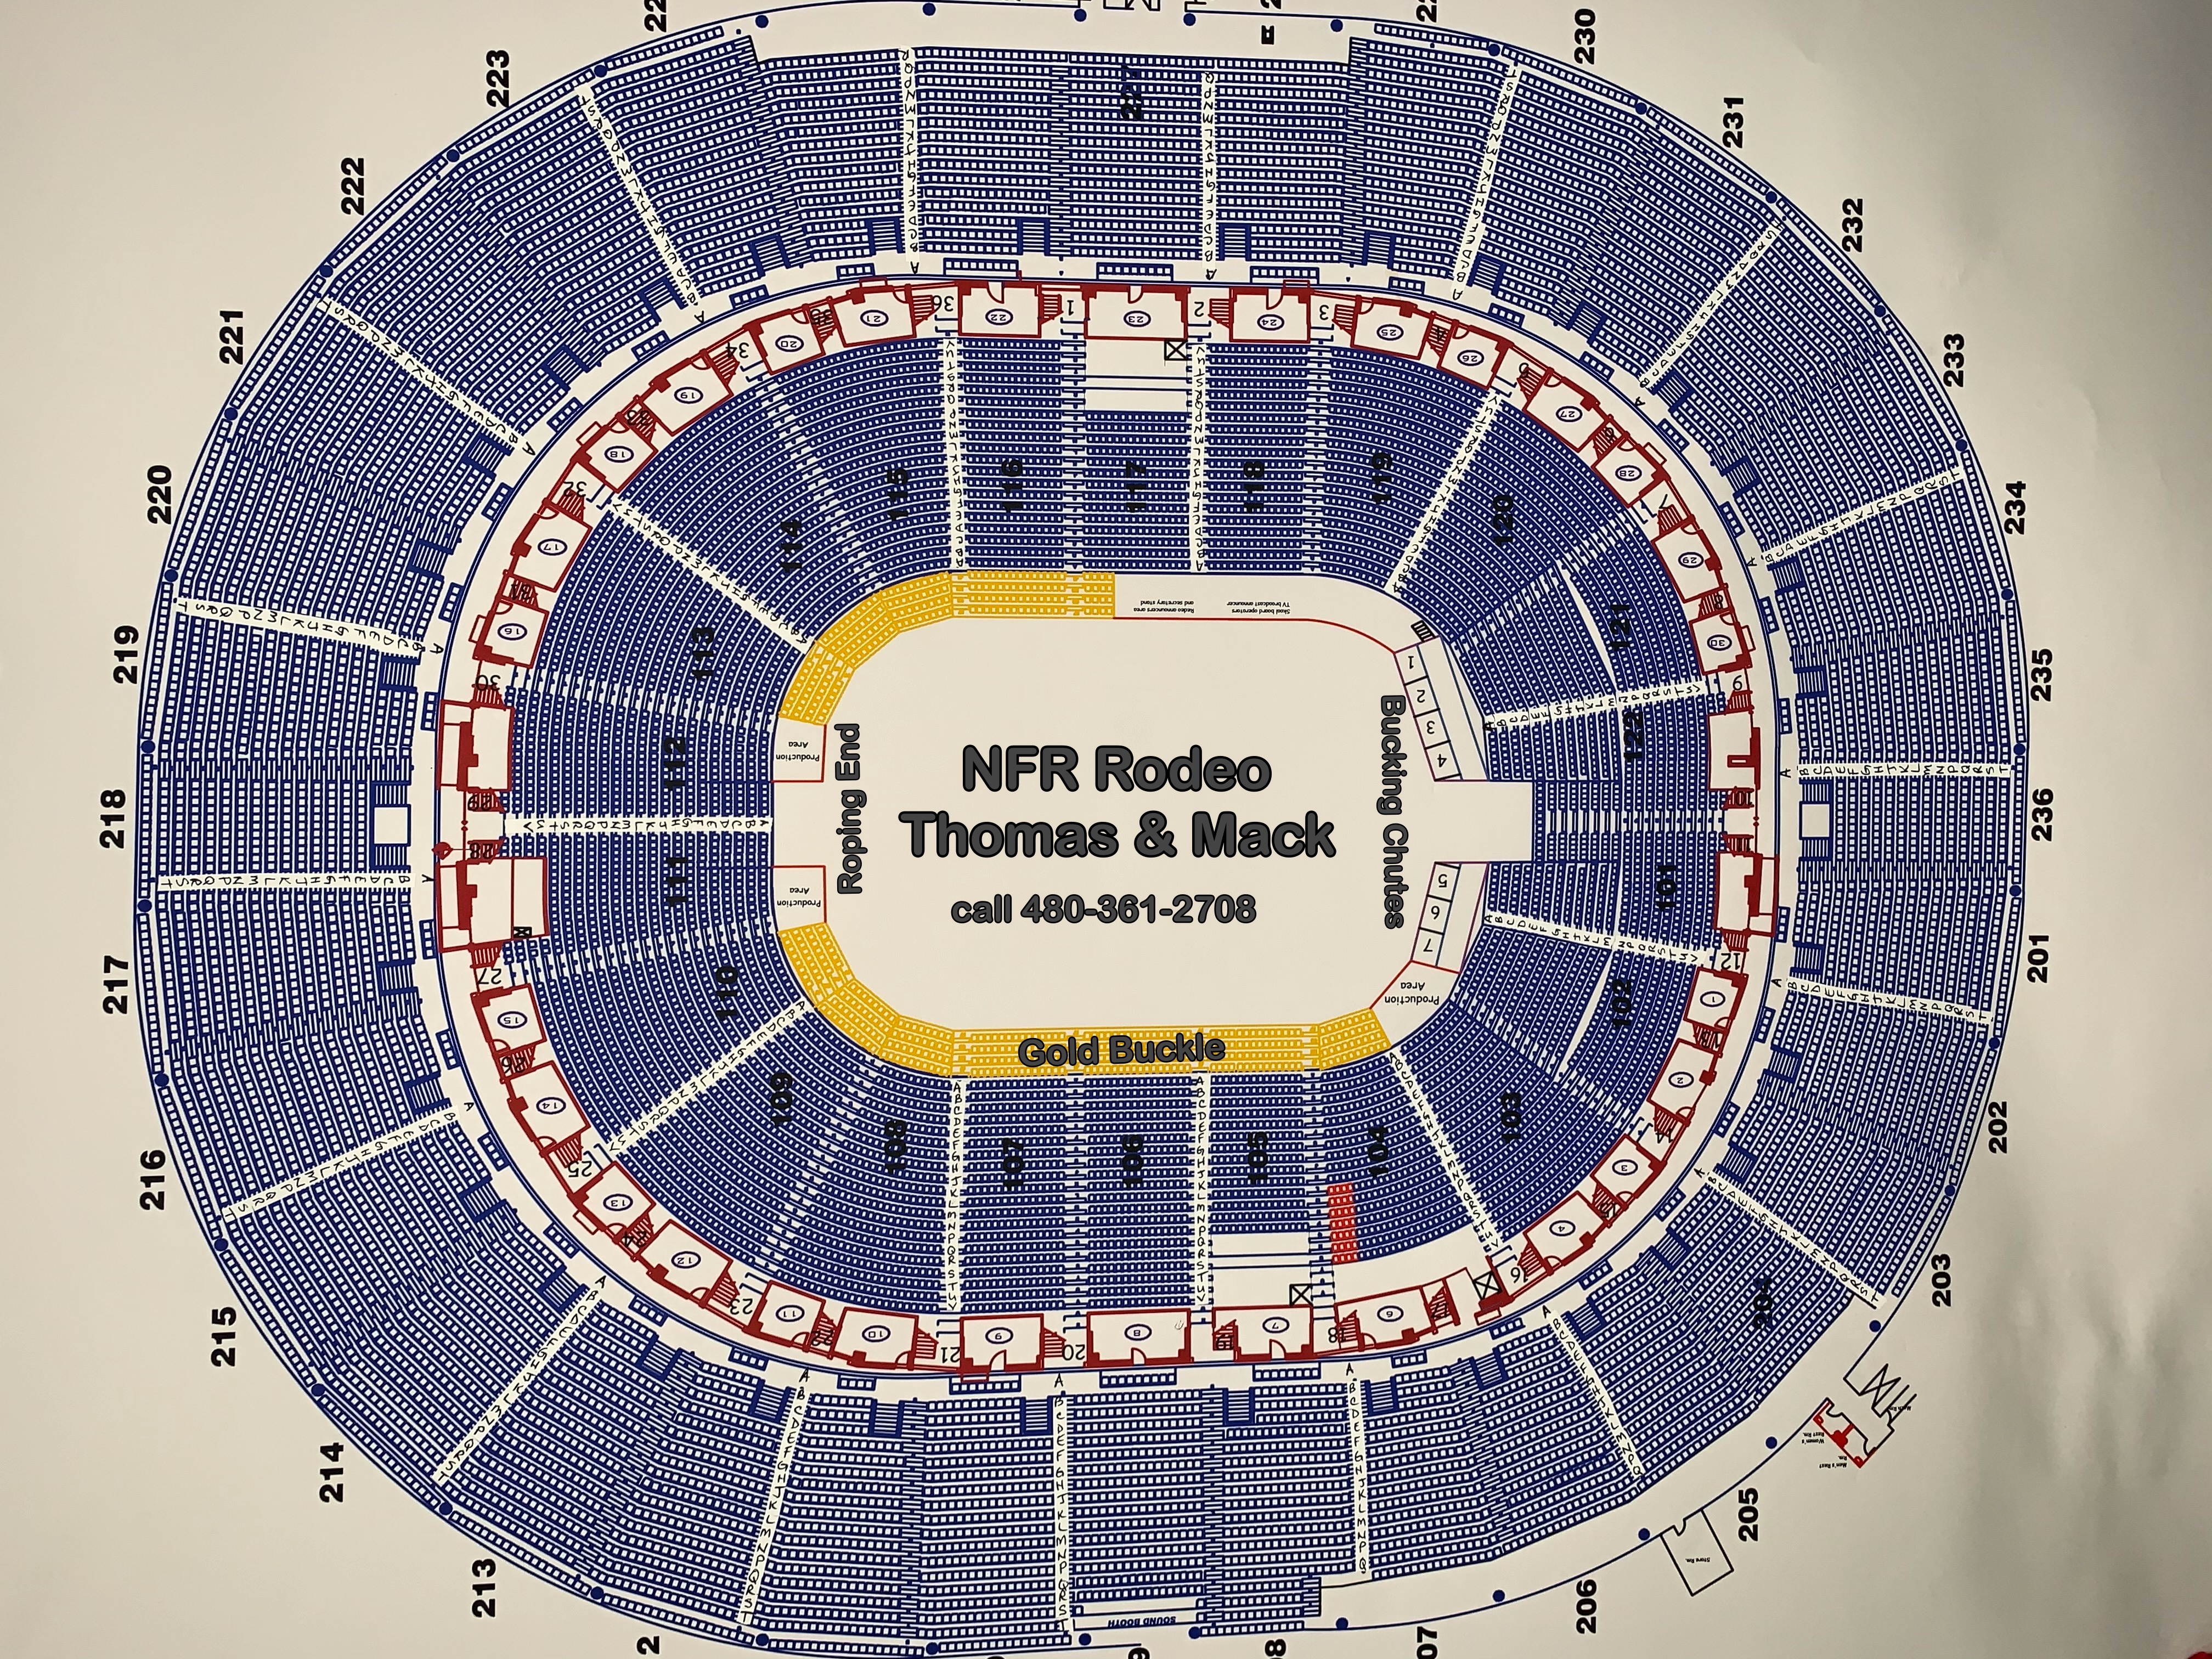 Washington Nationals seating chart: Best standing room seats